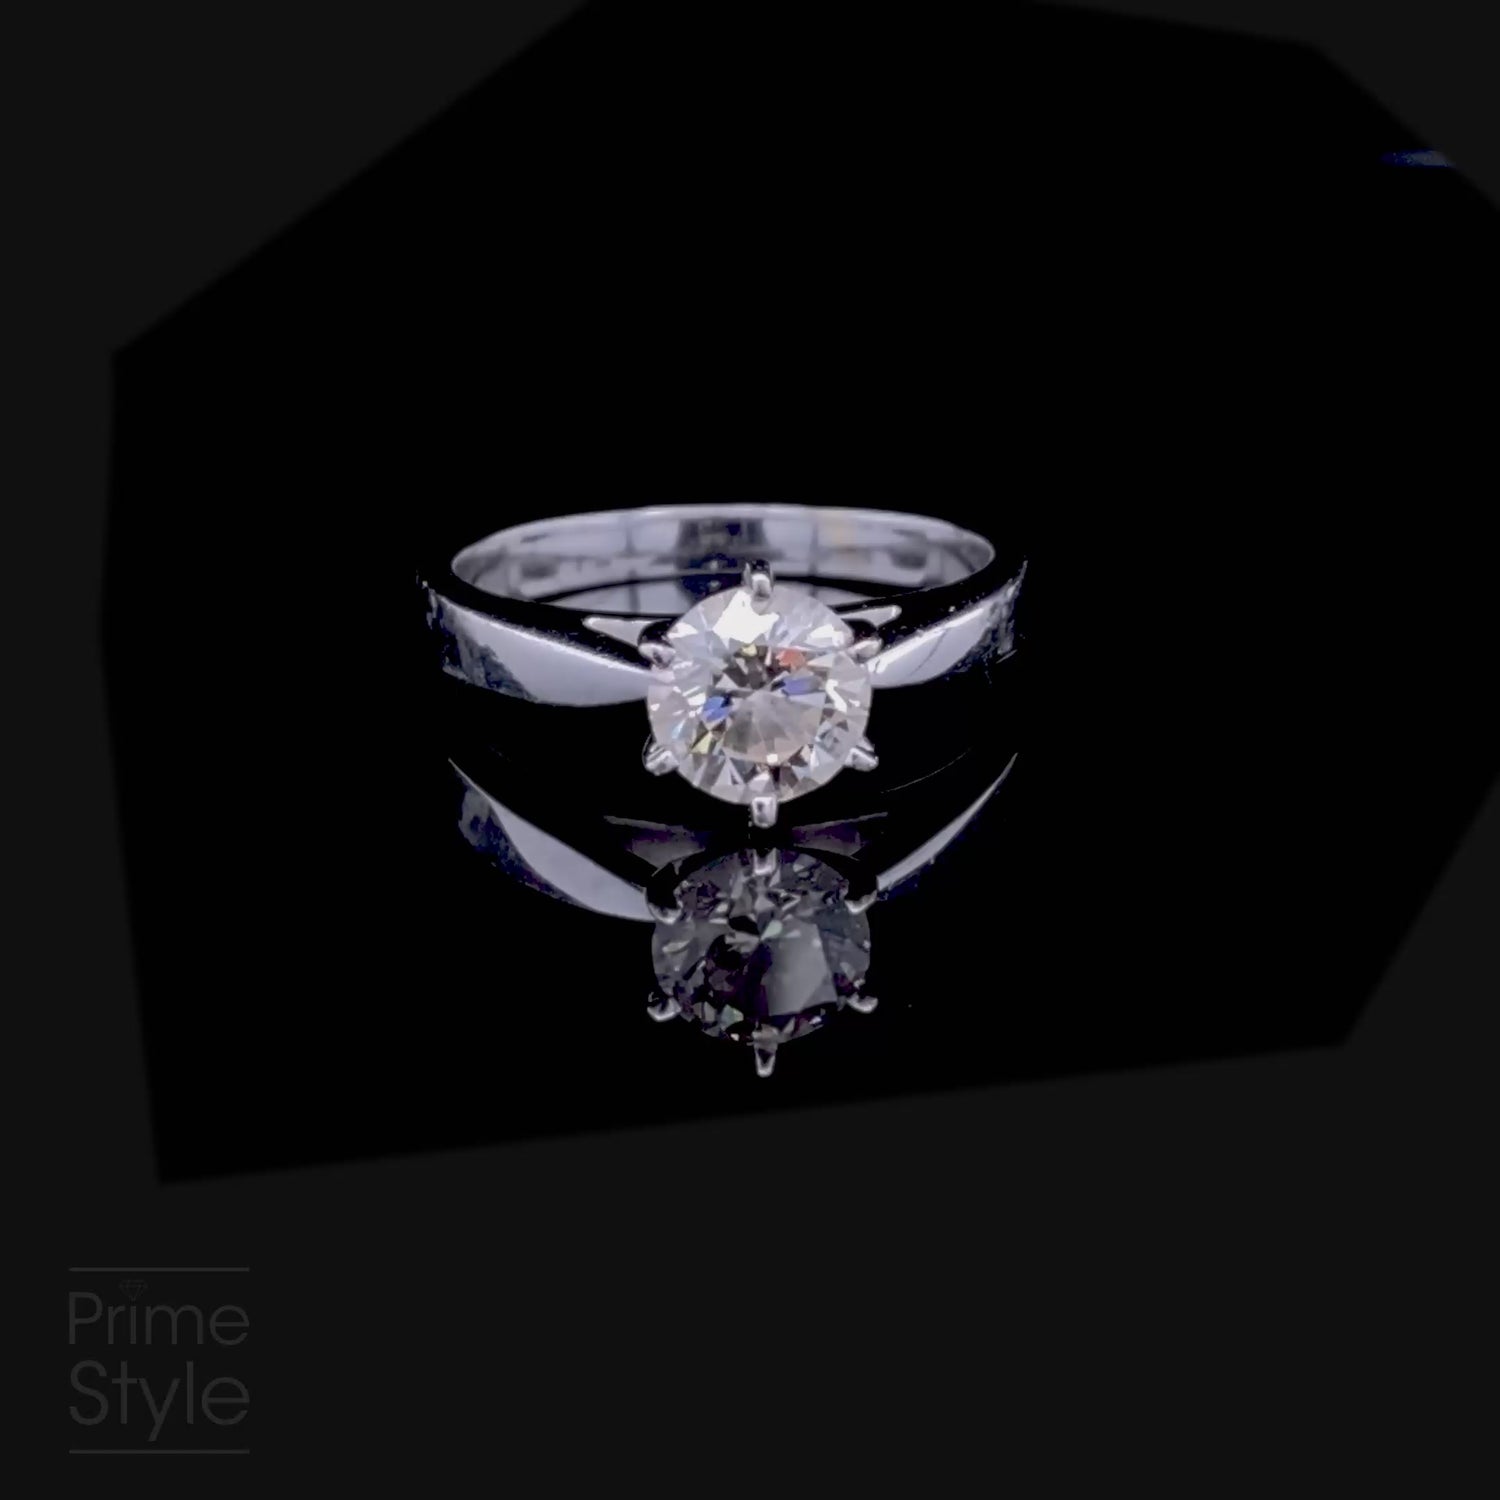 Exclusive 0.80 CT Round Cut Diamond Solitaire Ring in 14KT White Gold